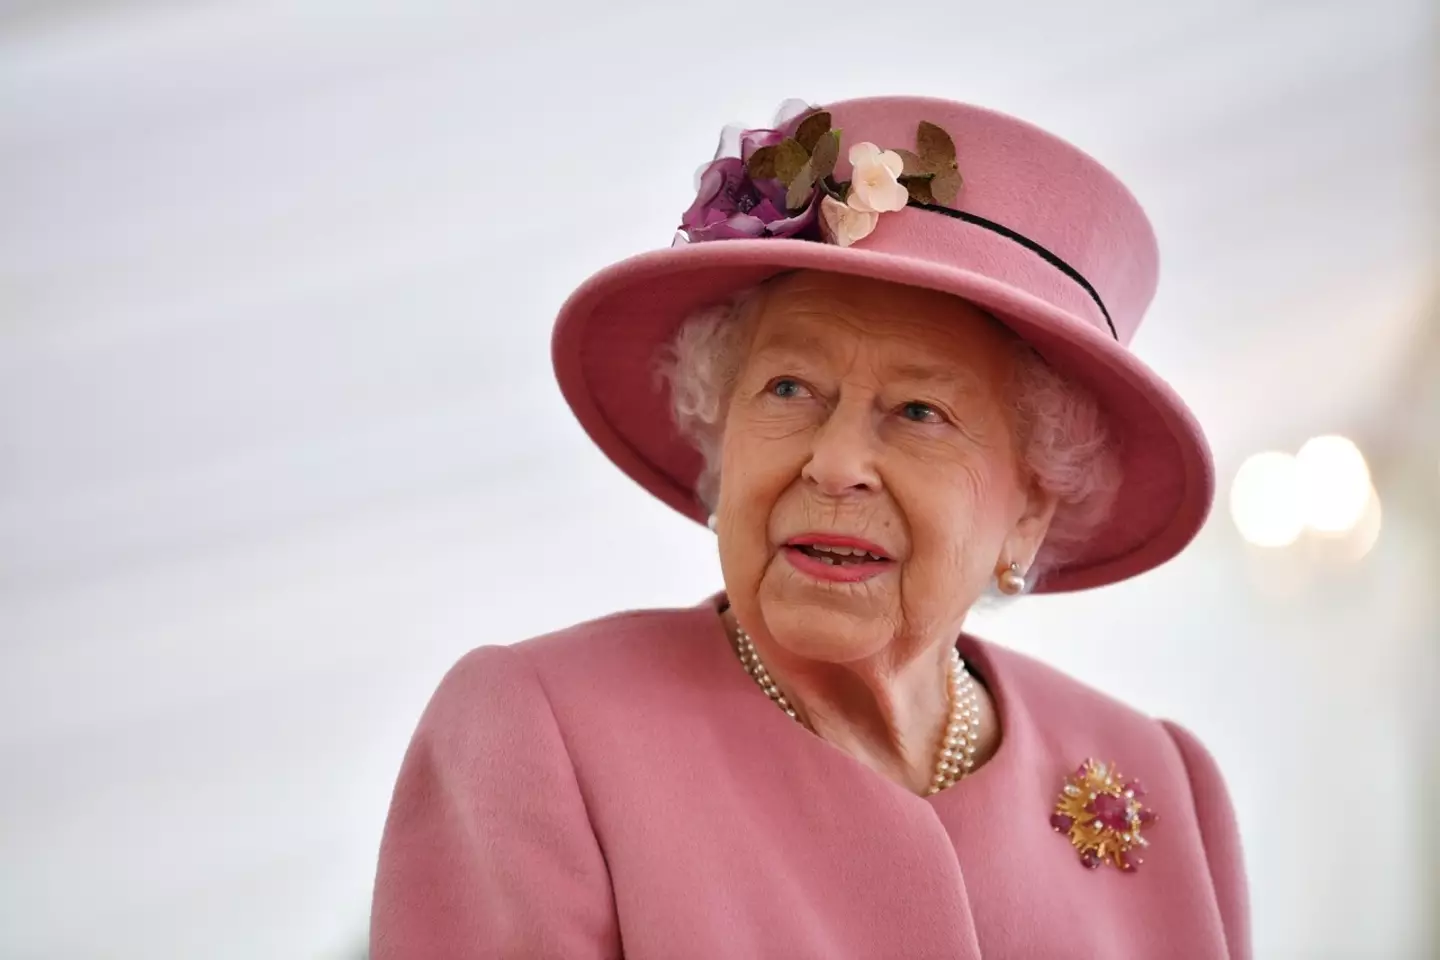 The late Queen Elizabeth II ruled our country for 70 years before she was laid to rest last September.